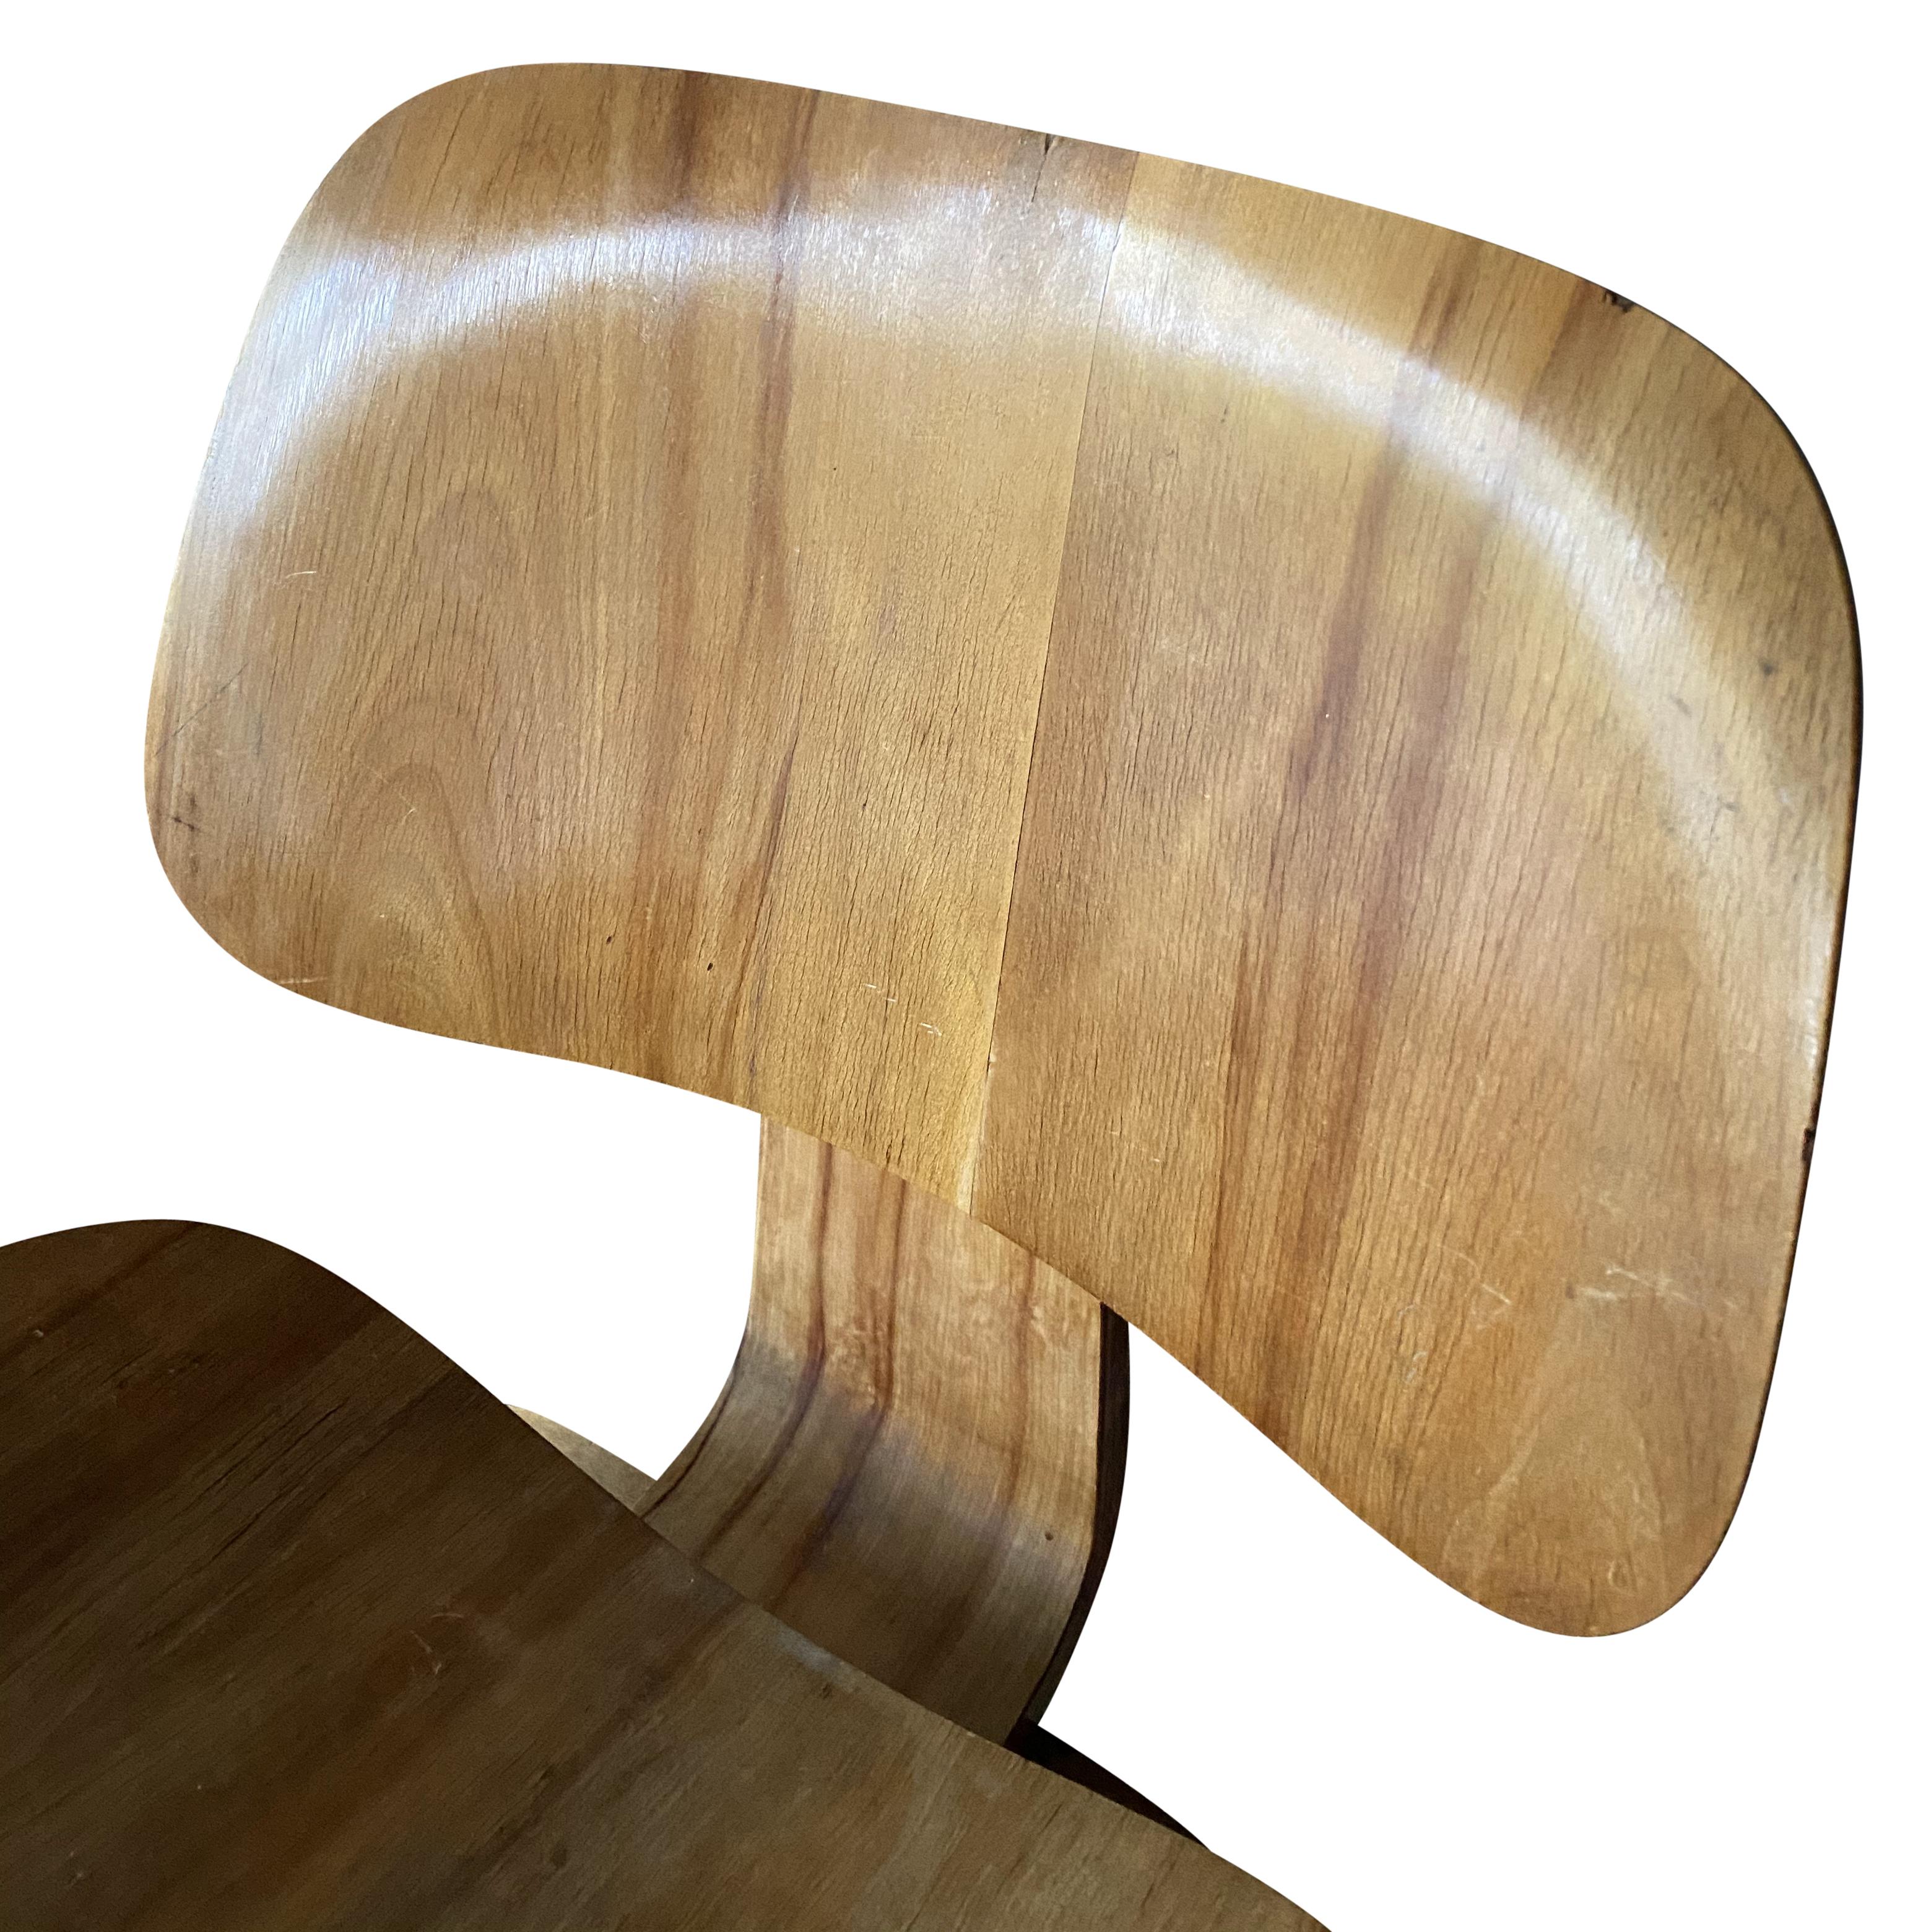 Early Eames DCW Mid-Century Modern bent plywood chair by Evans Products Pre-Herman Miller.